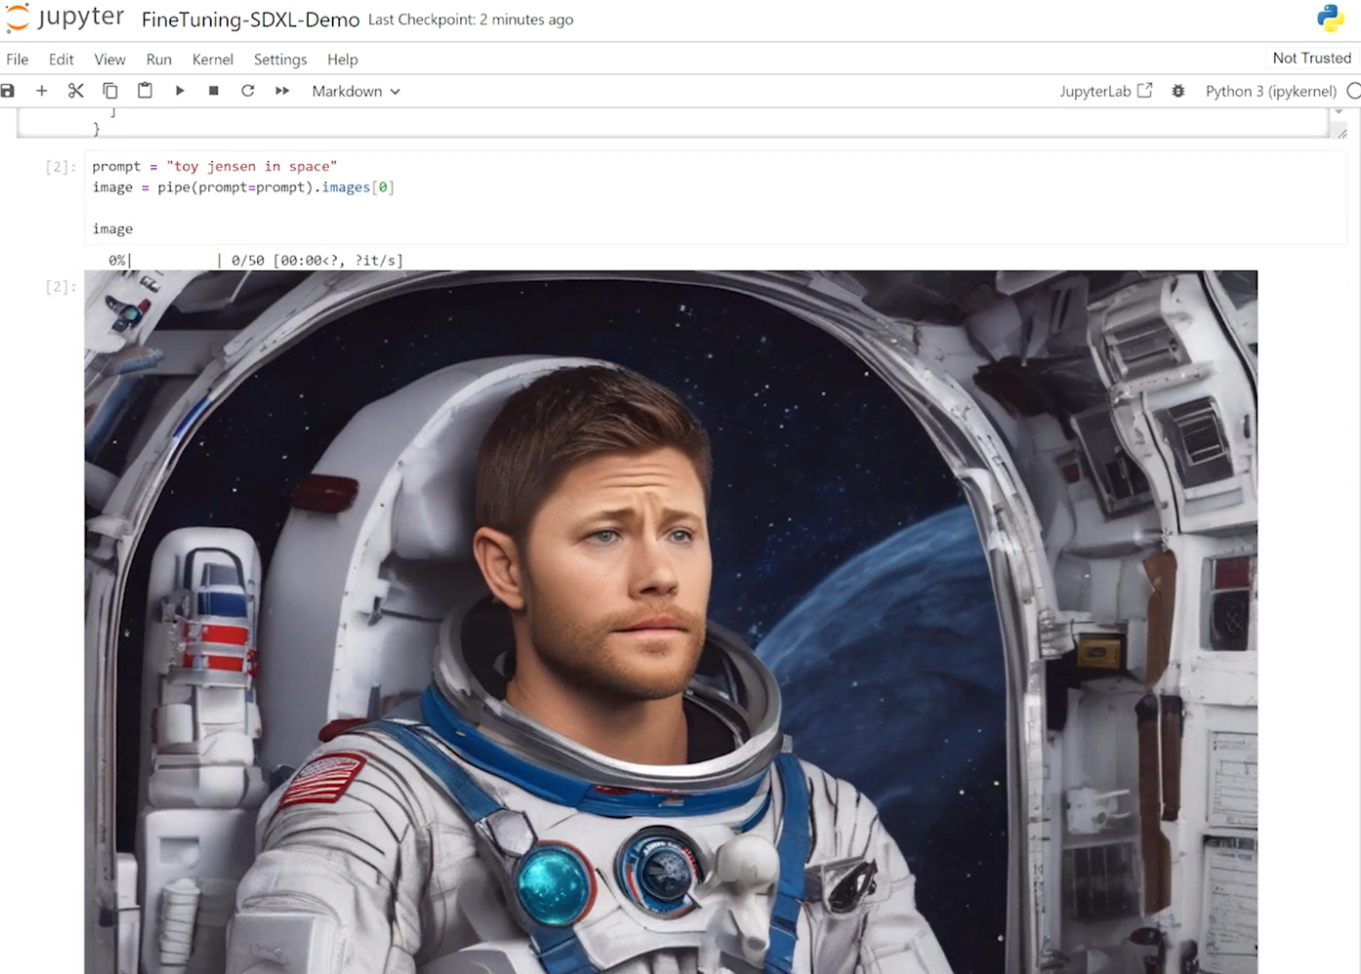 This screenshot shows a typical image result for the prompt “Toy Jensen in space” in a Jupyter notebook that was generated with the StableDiffusion XL model that hasn’t been fine-tuned with Toy Jensen specific images. There is a high-detail image of an astronaut in a space suit, but it doesn’t look like Toy Jensen at all. 